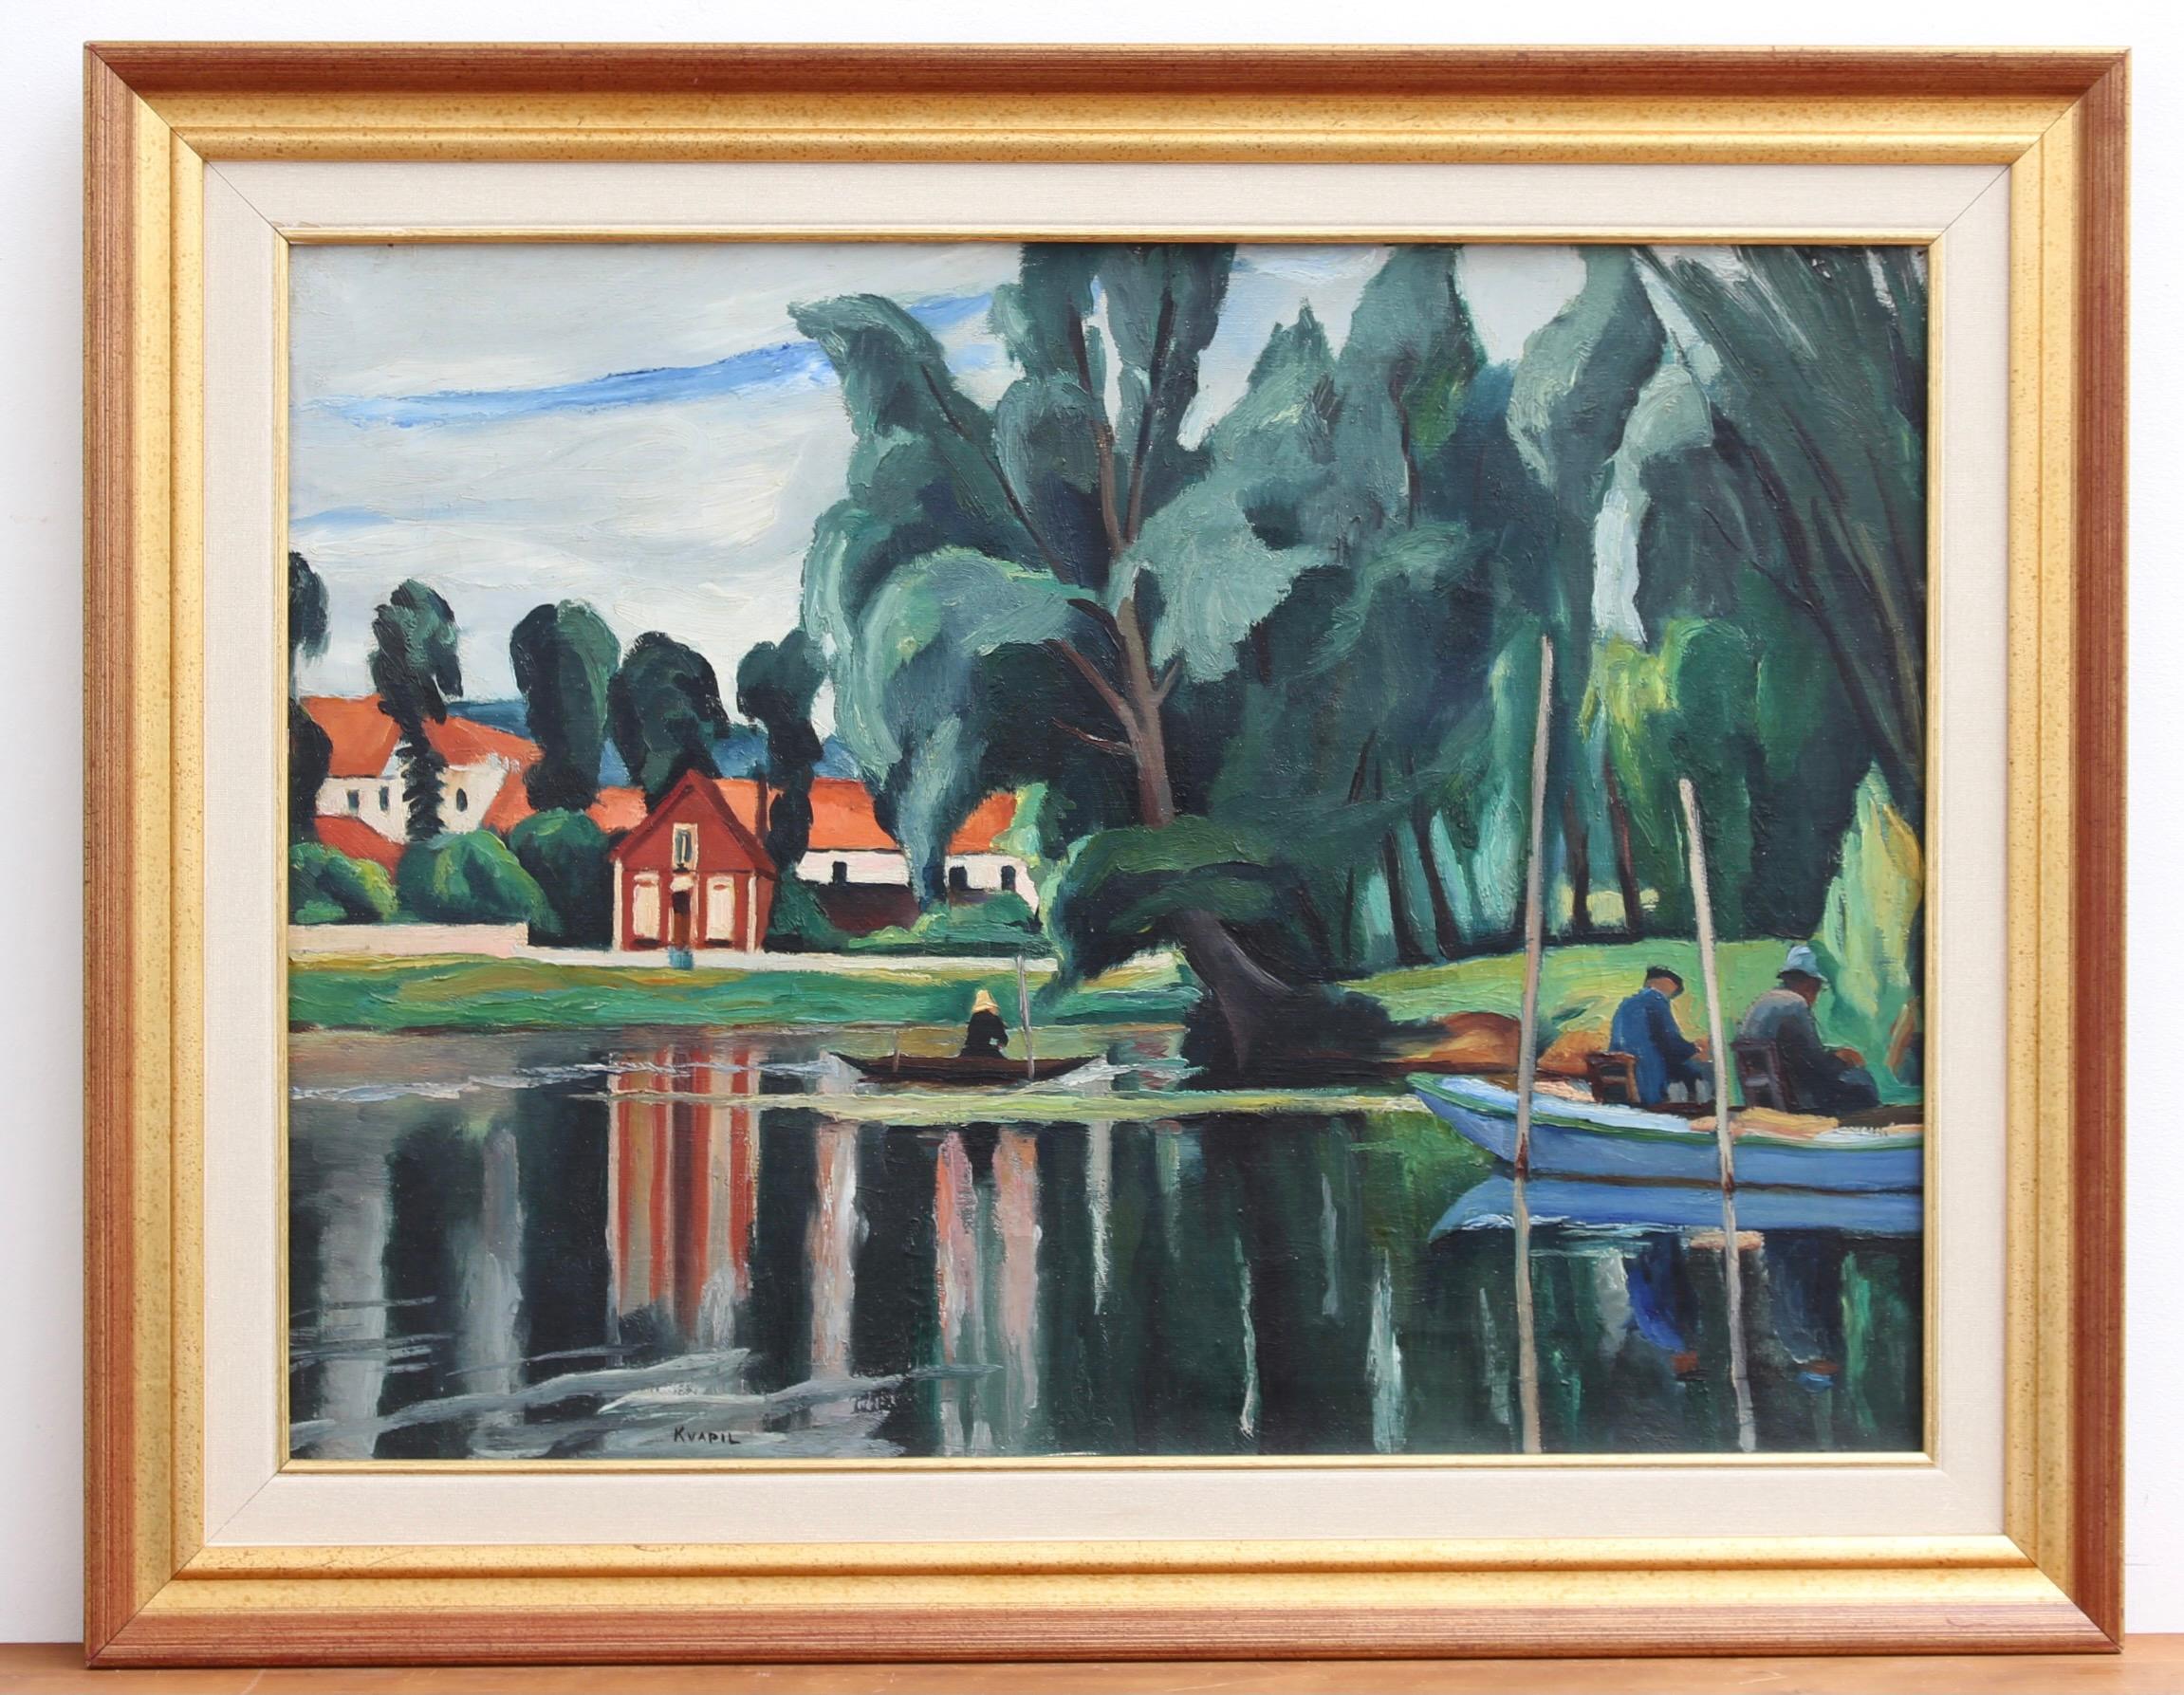 Boats on a Pond - Painting by Charles Kvapil